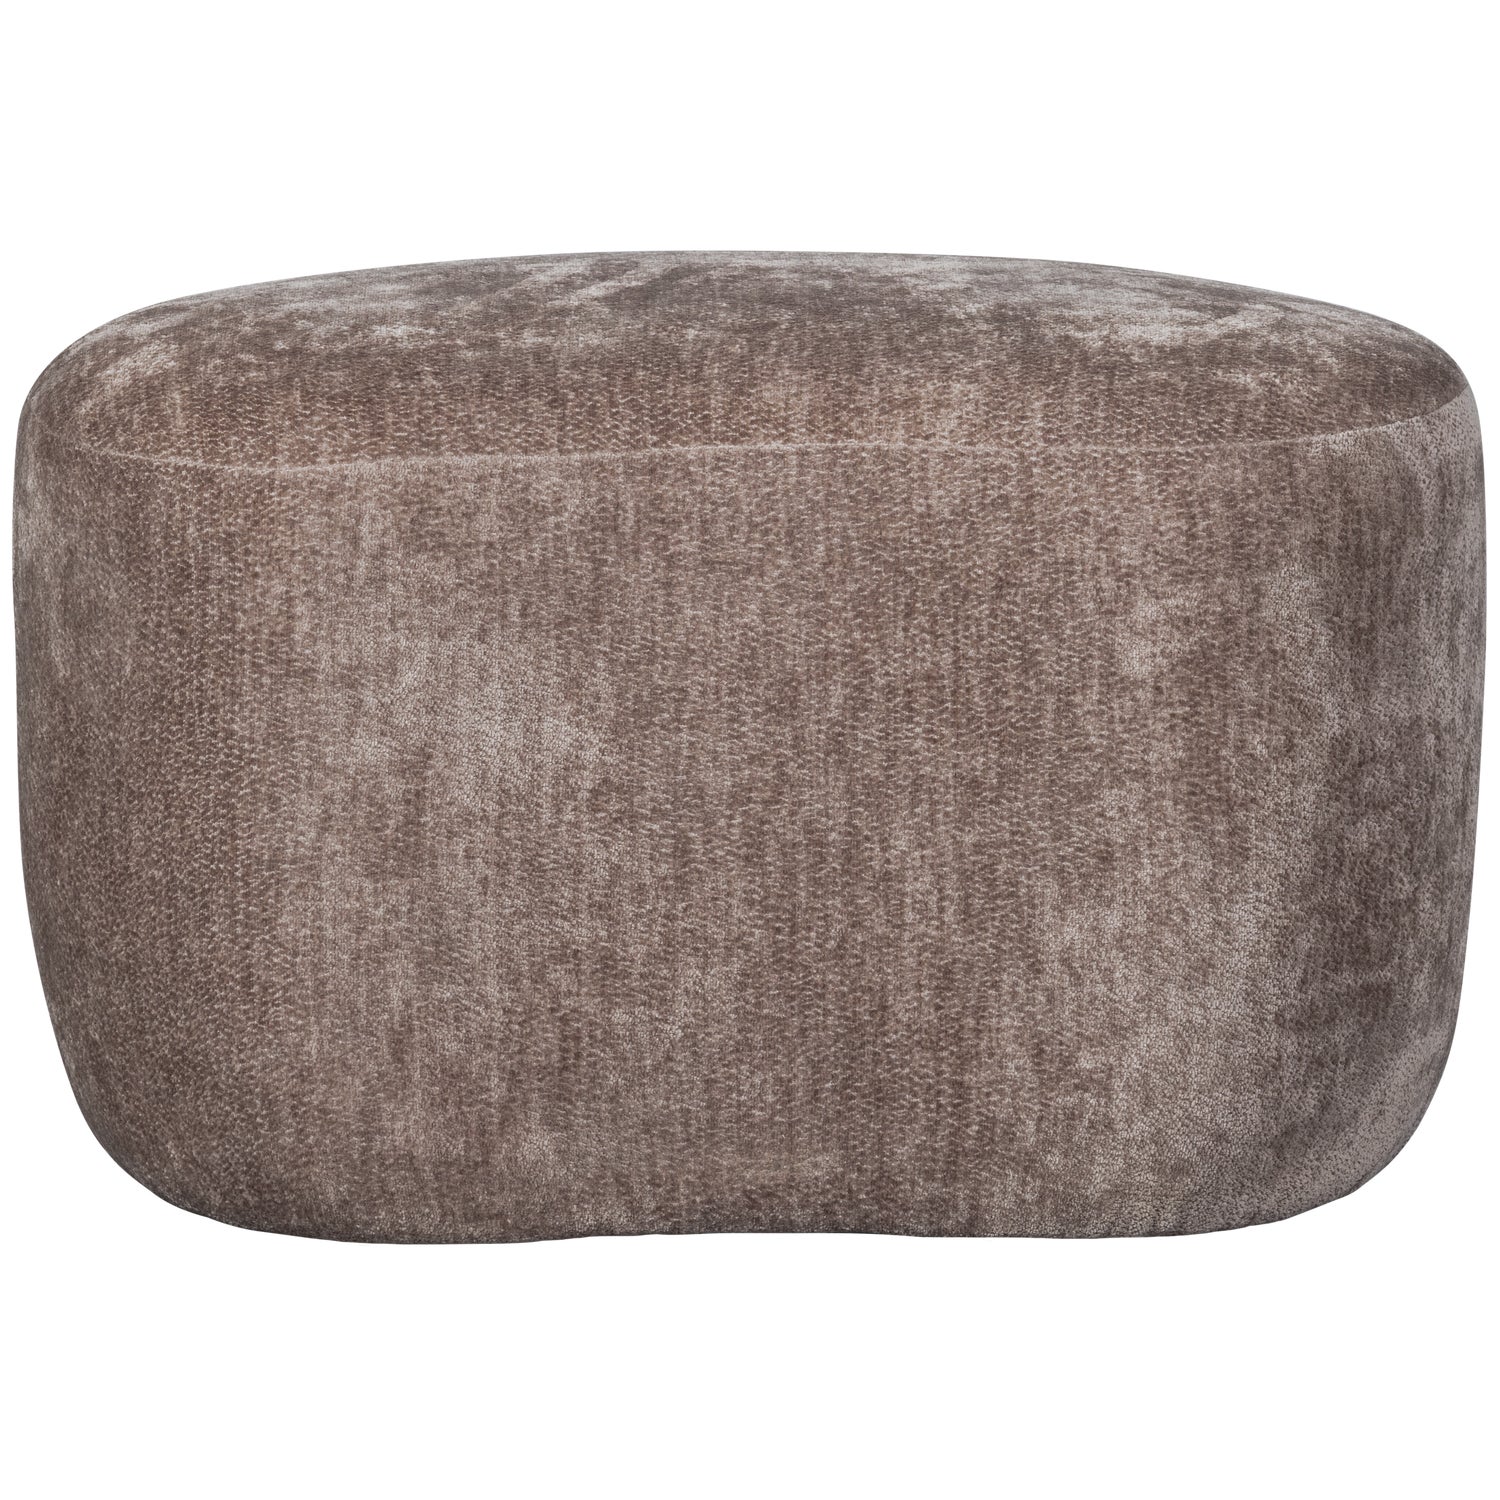 801431-T-01_VS_BP_Popular_hocker_taupe.png?auto=webp&format=png&width=1500&height=1500